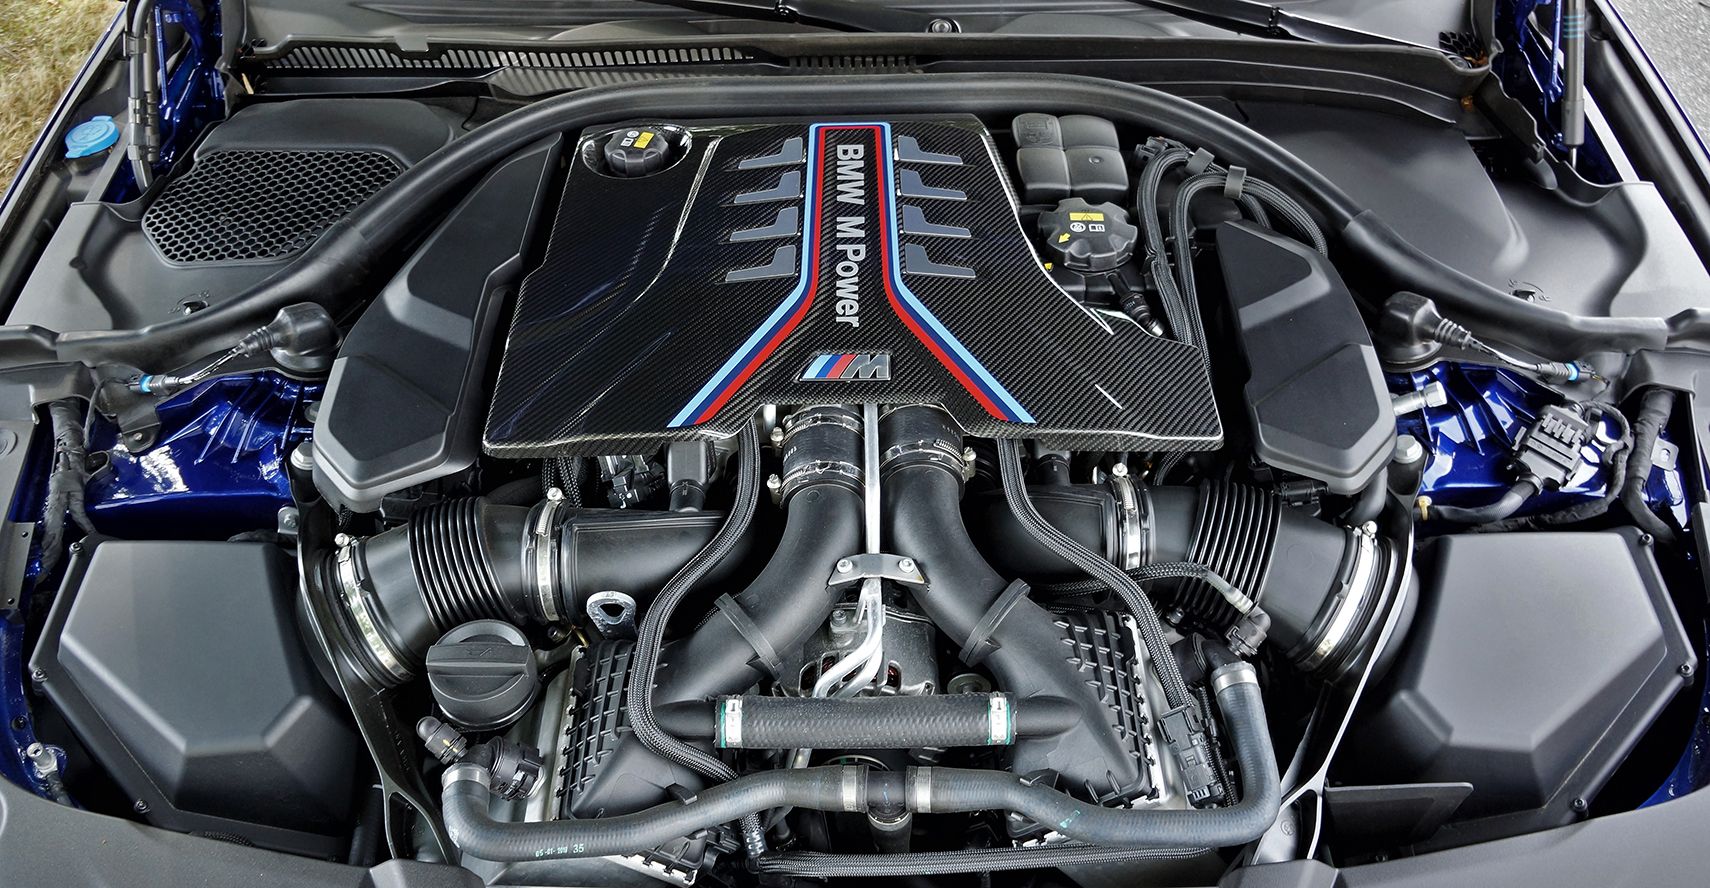 Many find the M5's engine its most beautiful feature.